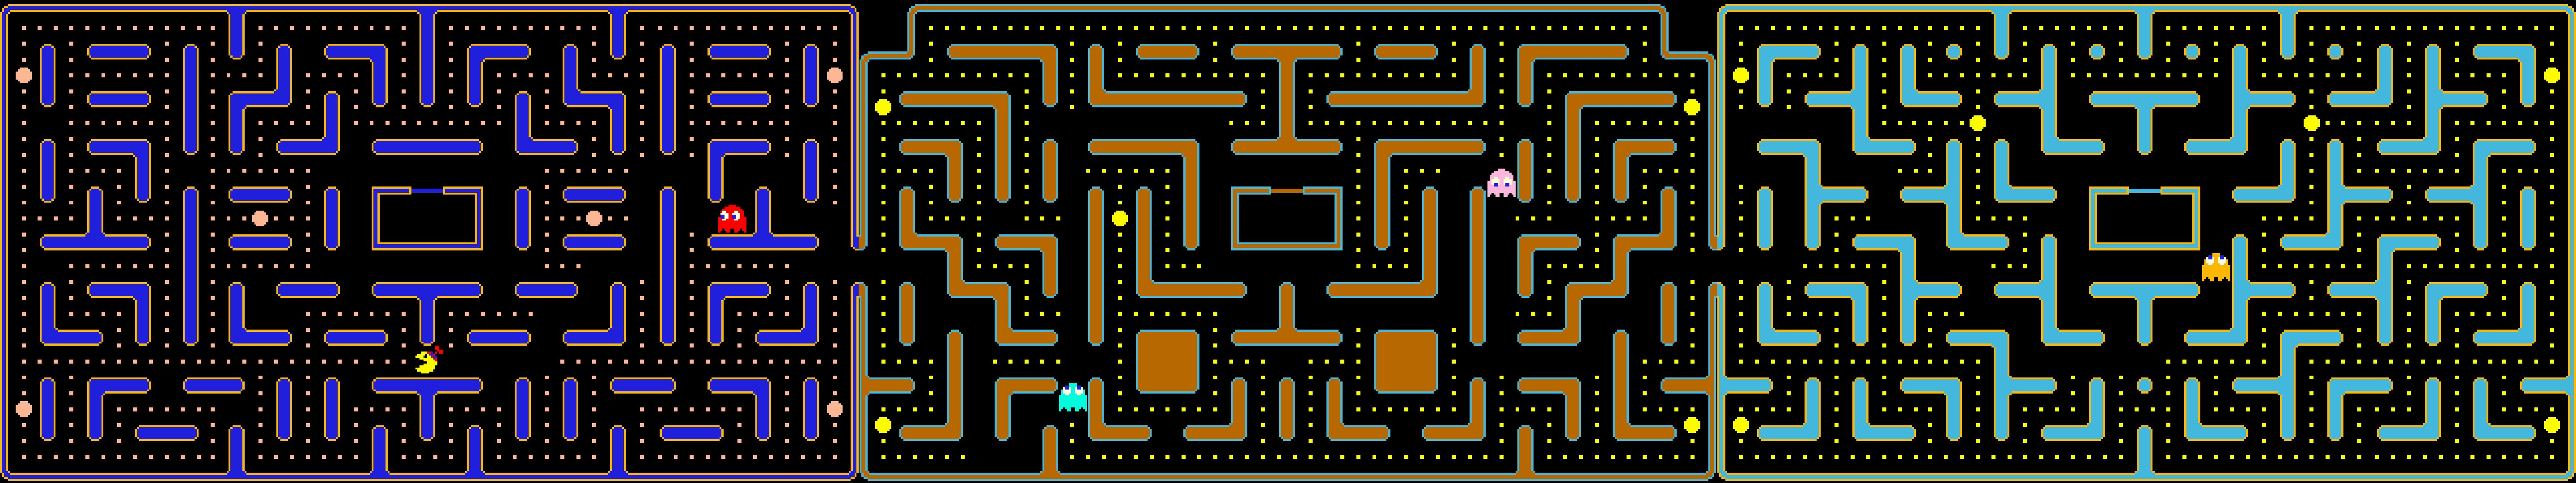 Game Jeu Pacman Pac Man Video Vedeogame Wallpaper Background